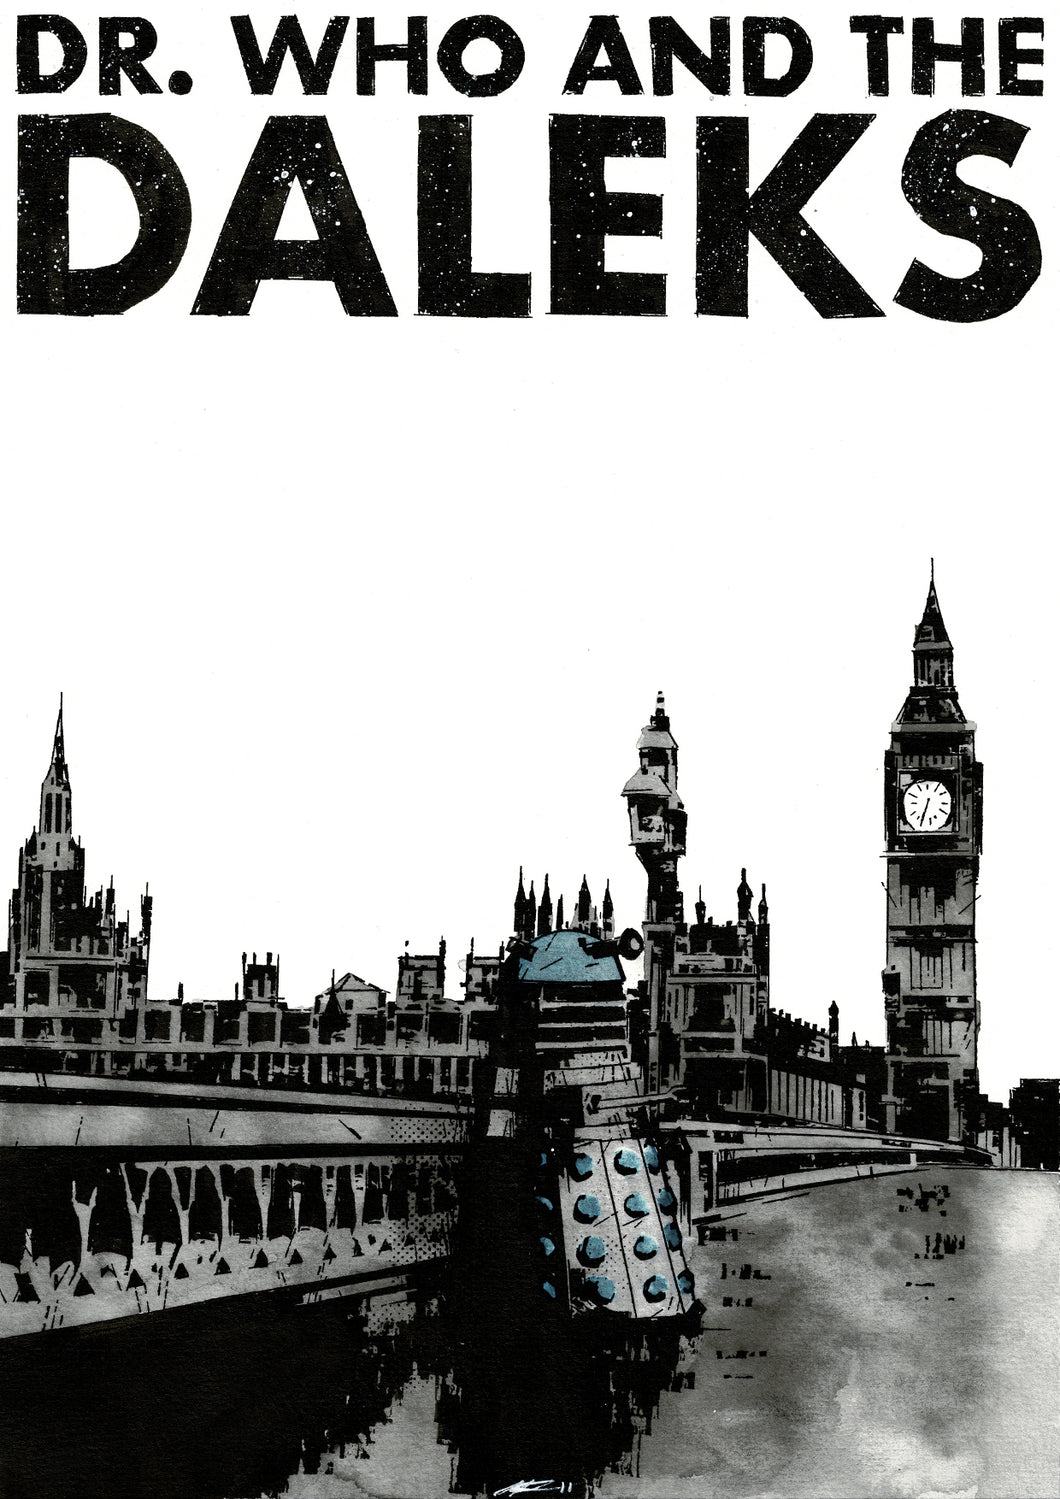 DR. WHO AND THE DALEKS + ART BOOK